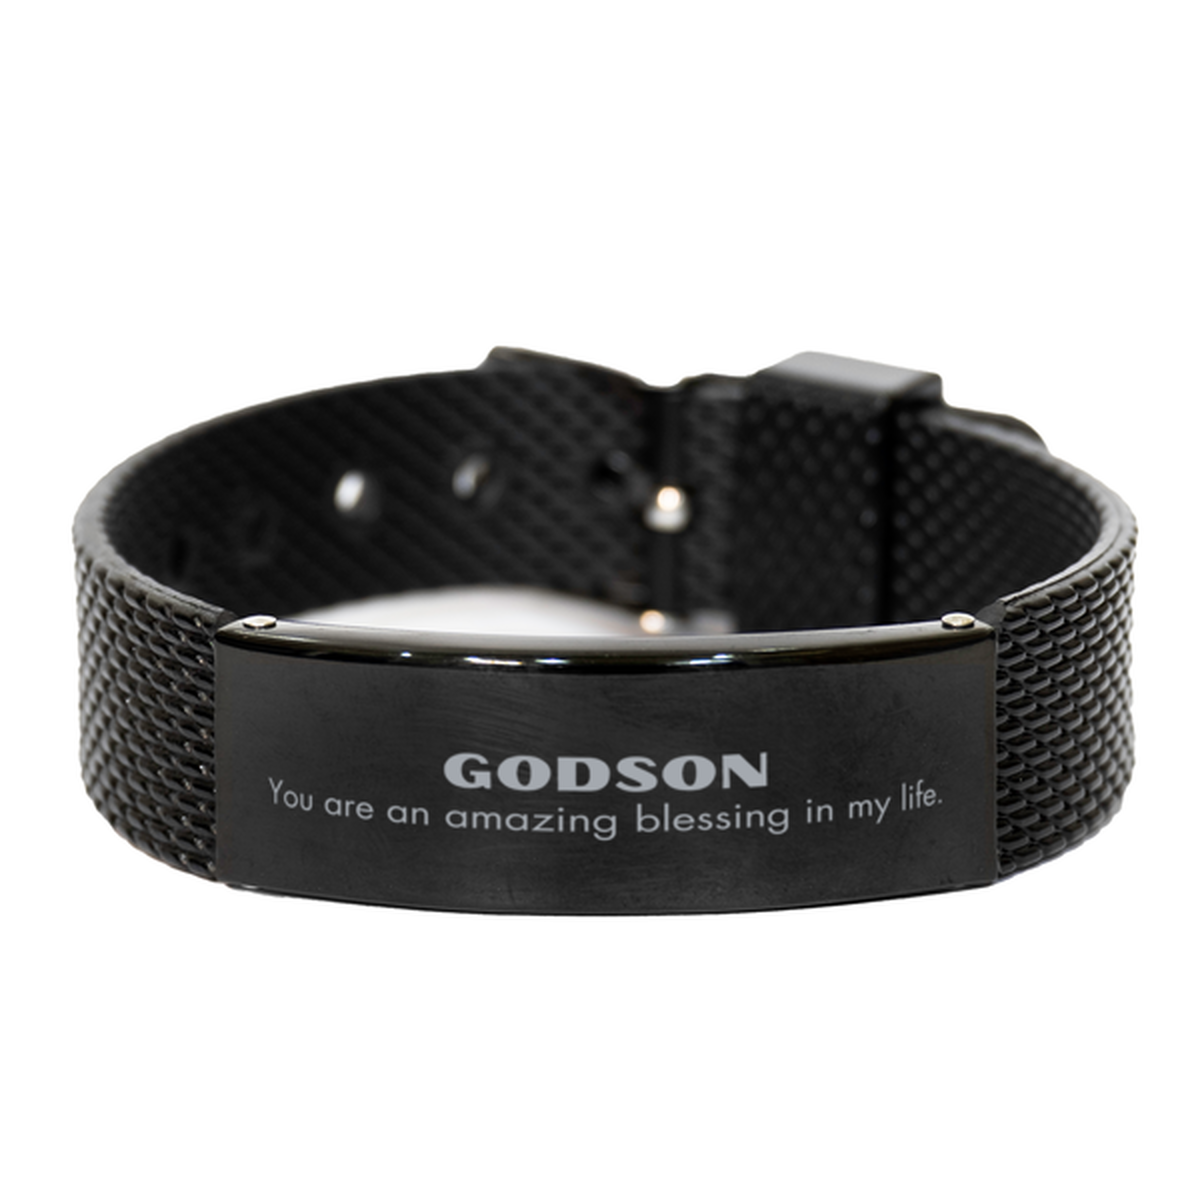 Godson Black Shark Mesh Bracelet, You are an amazing blessing in my life, Thank You Gifts For Godson, Inspirational Birthday Christmas Unique Gifts For Godson